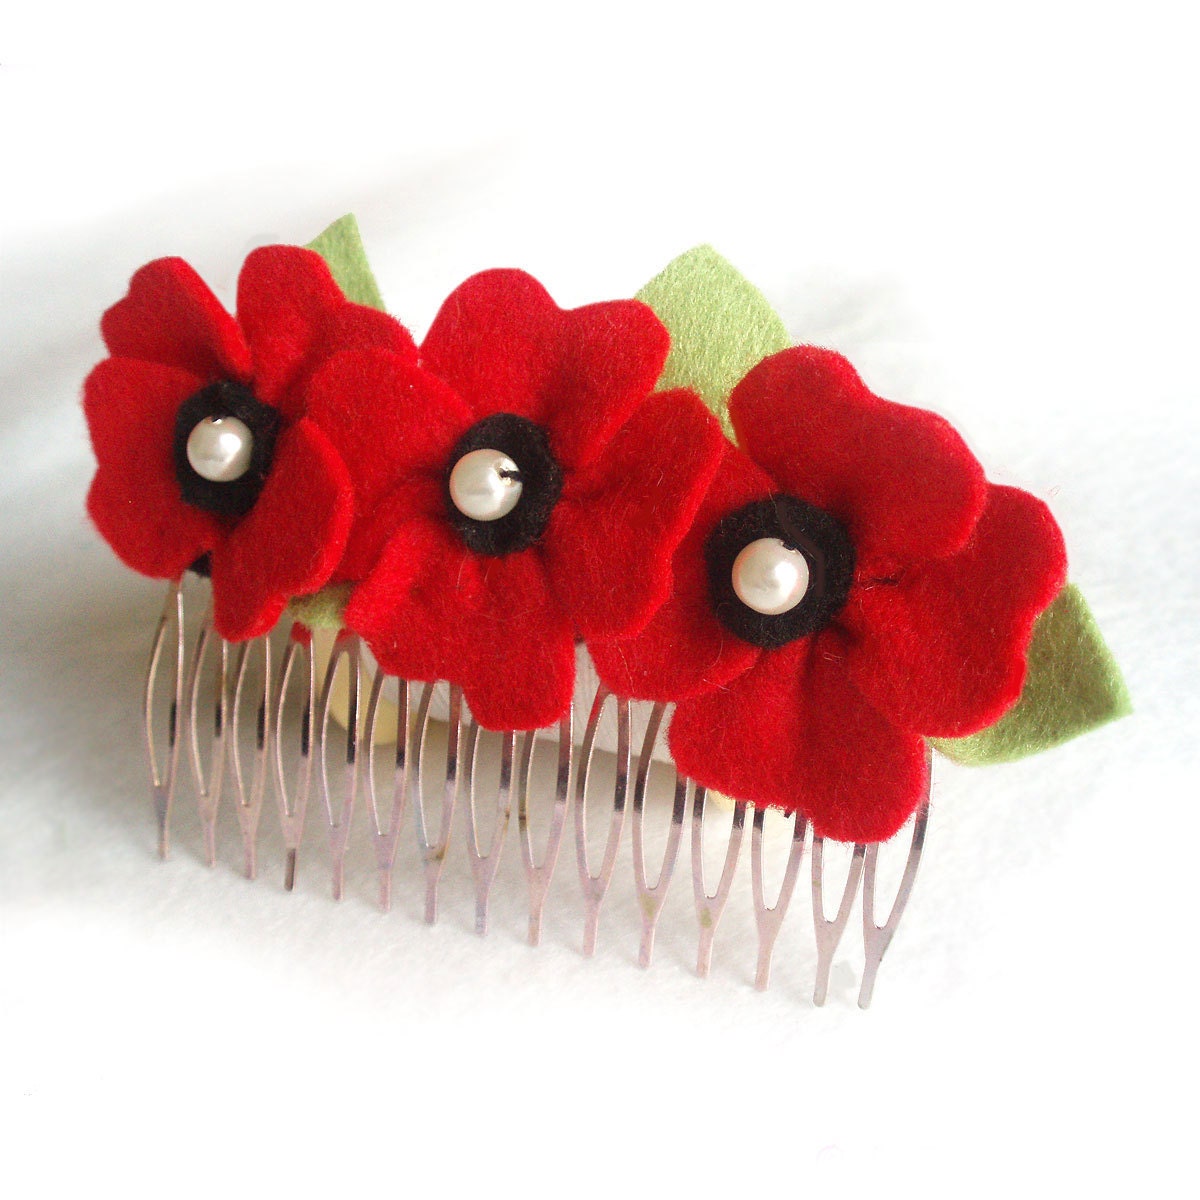 Bright Red Poppies Hair Comb, Floral Accessory With Felt Flowers & Glass Pearls